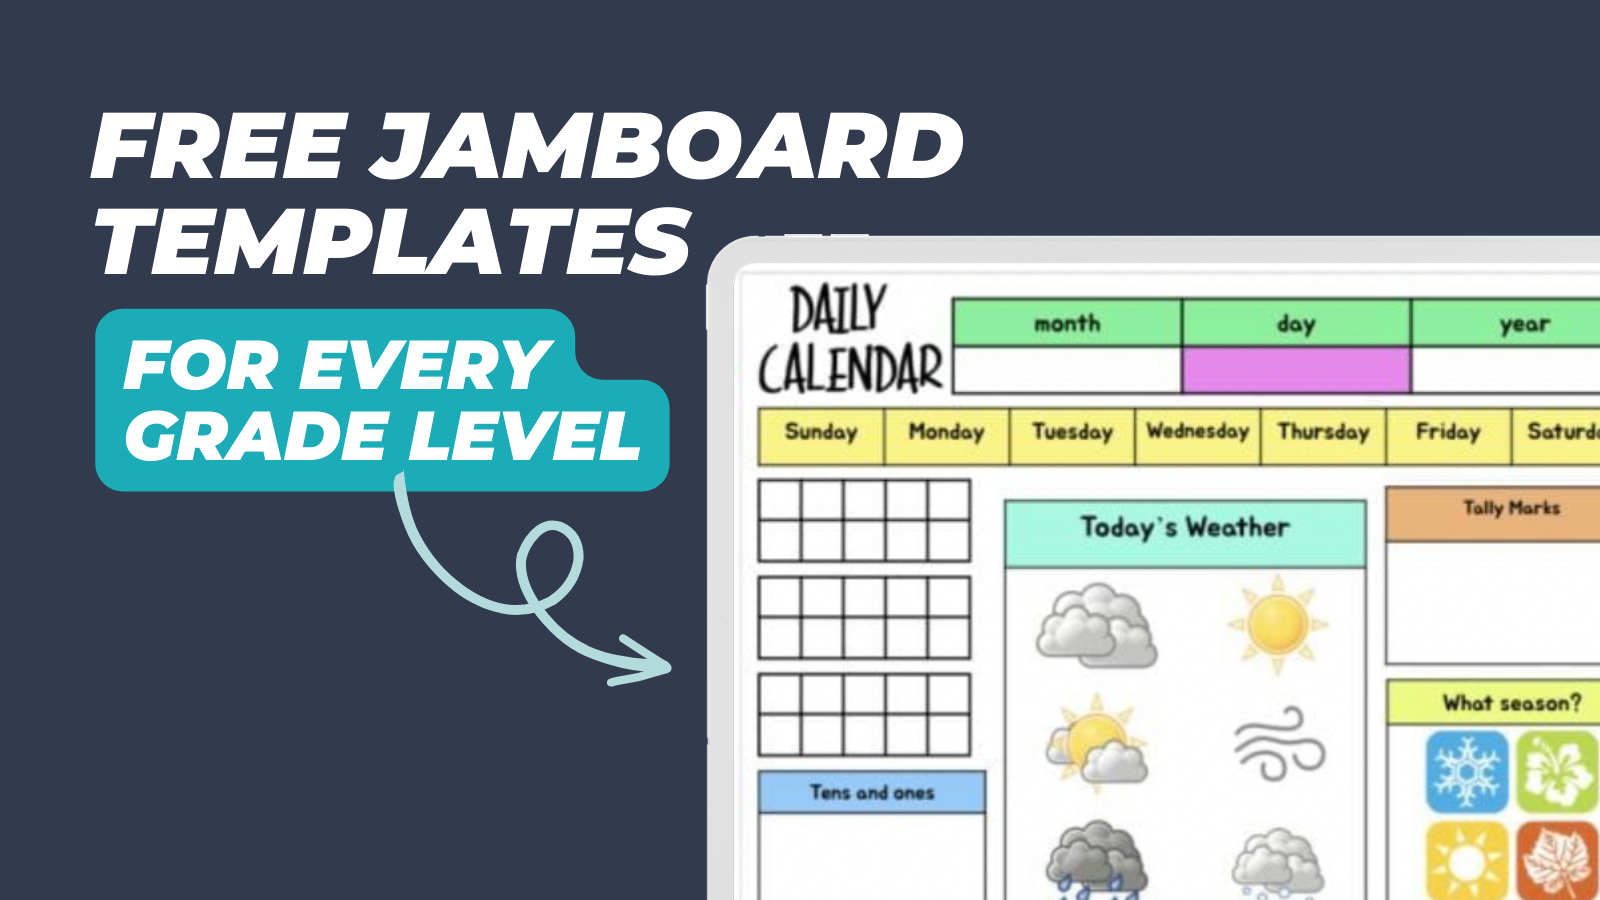 25 Free Jamboard Templates and Ideas for Teachers